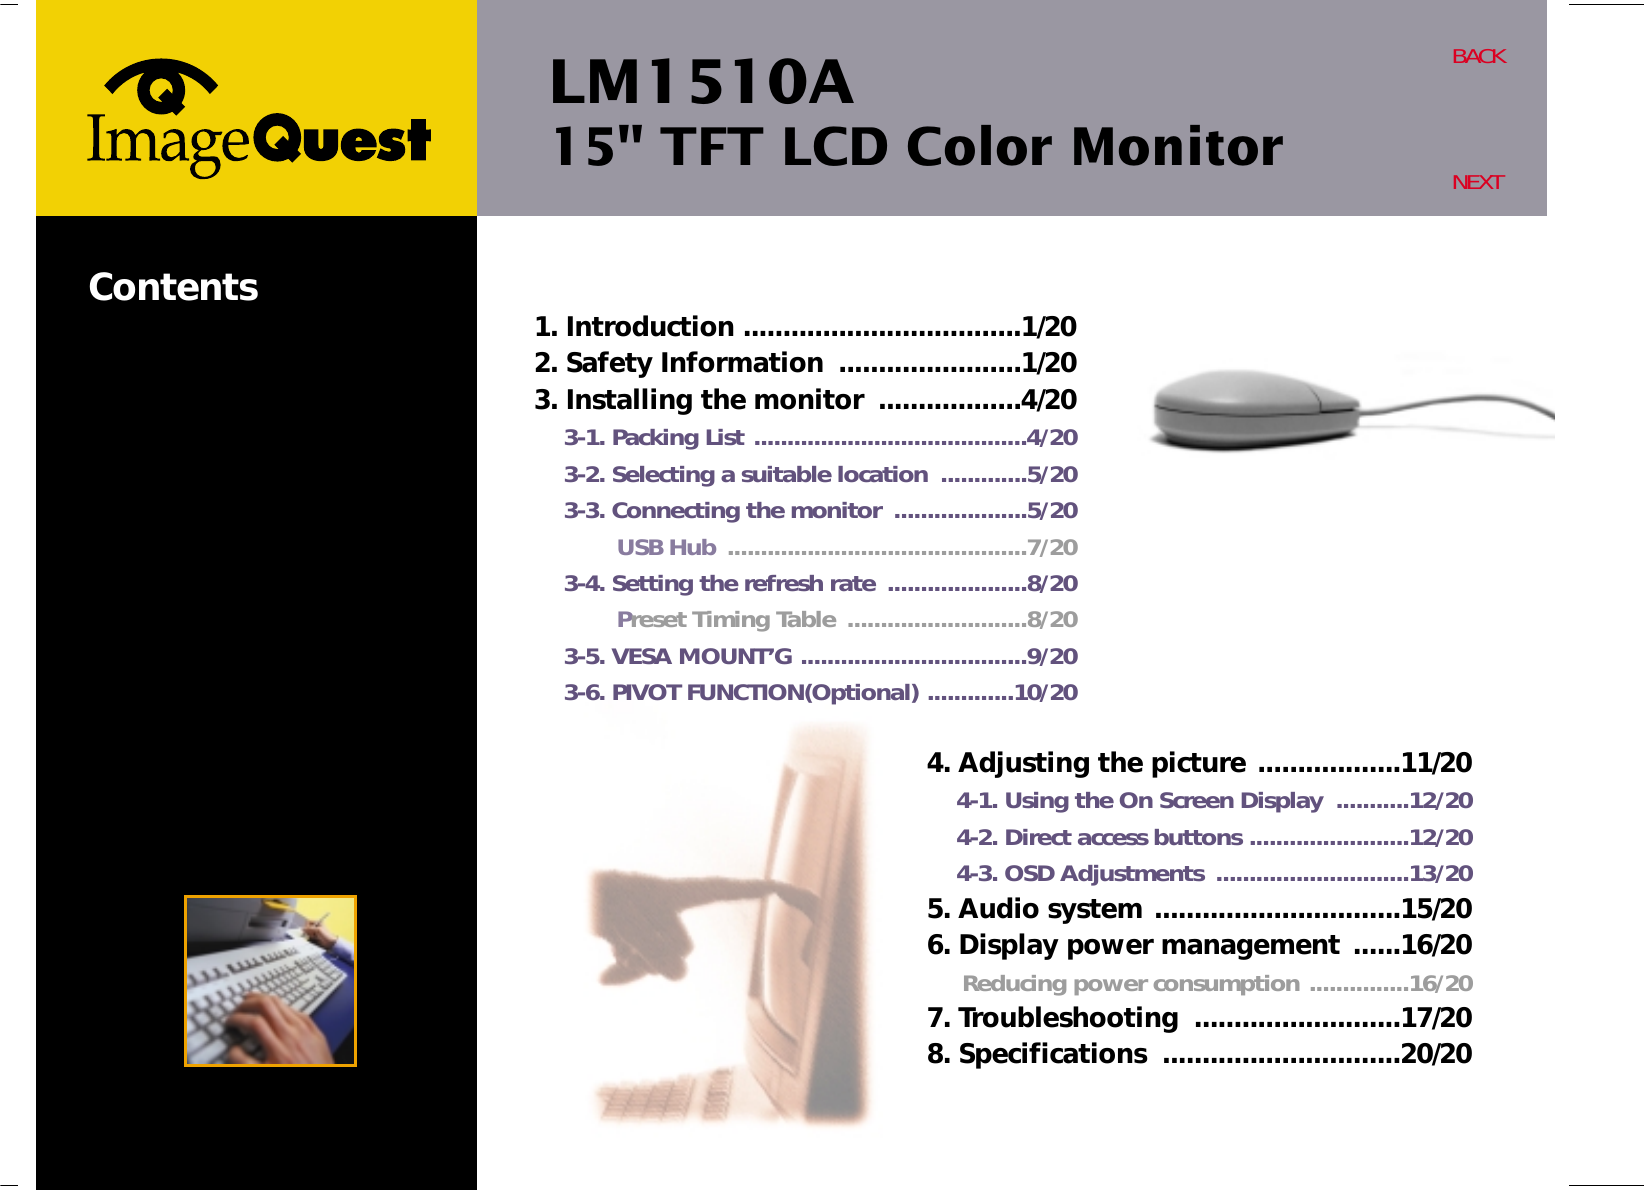 LM1510A15&quot; TFT LCD Color MonitorBACKNEXTContents 1. Introduction ...................................1/202. Safety Information  .......................1/203. Installing the monitor  ..................4/203-1. Packing List .........................................4/203-2. Selecting a suitable location  .............5/203-3. Connecting the monitor  ....................5/20USB Hub .............................................7/203-4. Setting the refresh rate  .....................8/20Preset Timing Table  ...........................8/203-5. VESA MOUNT’G ..................................9/203-6. PIVOT FUNCTION(Optional) .............10/204. Adjusting the picture ..................11/204-1. Using the On Screen Display  ...........12/204-2. Direct access buttons ........................12/204-3. OSD Adjustments  .............................13/205. Audio system ...............................15/206. Display power management ......16/20Reducing power consumption ...............16/207. Troubleshooting  ..........................17/208. Specifications  ..............................20/20